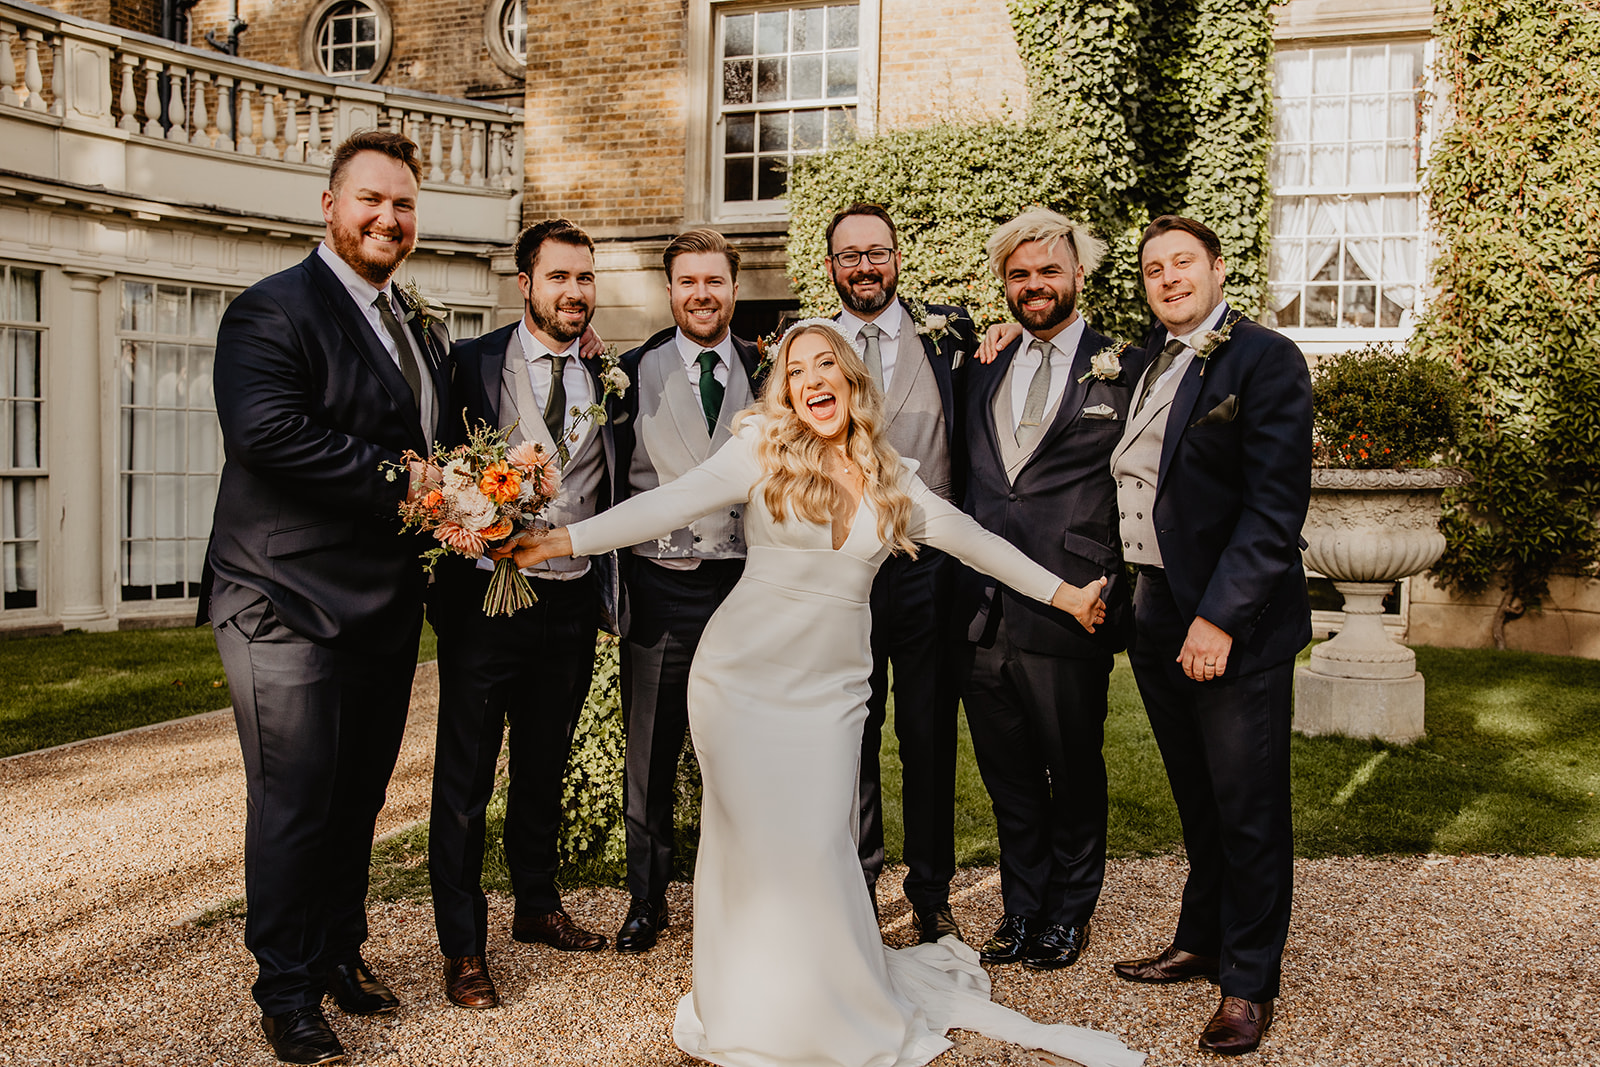 Wedding party at a Hampton Court House Wedding. By Olive Joy Photography